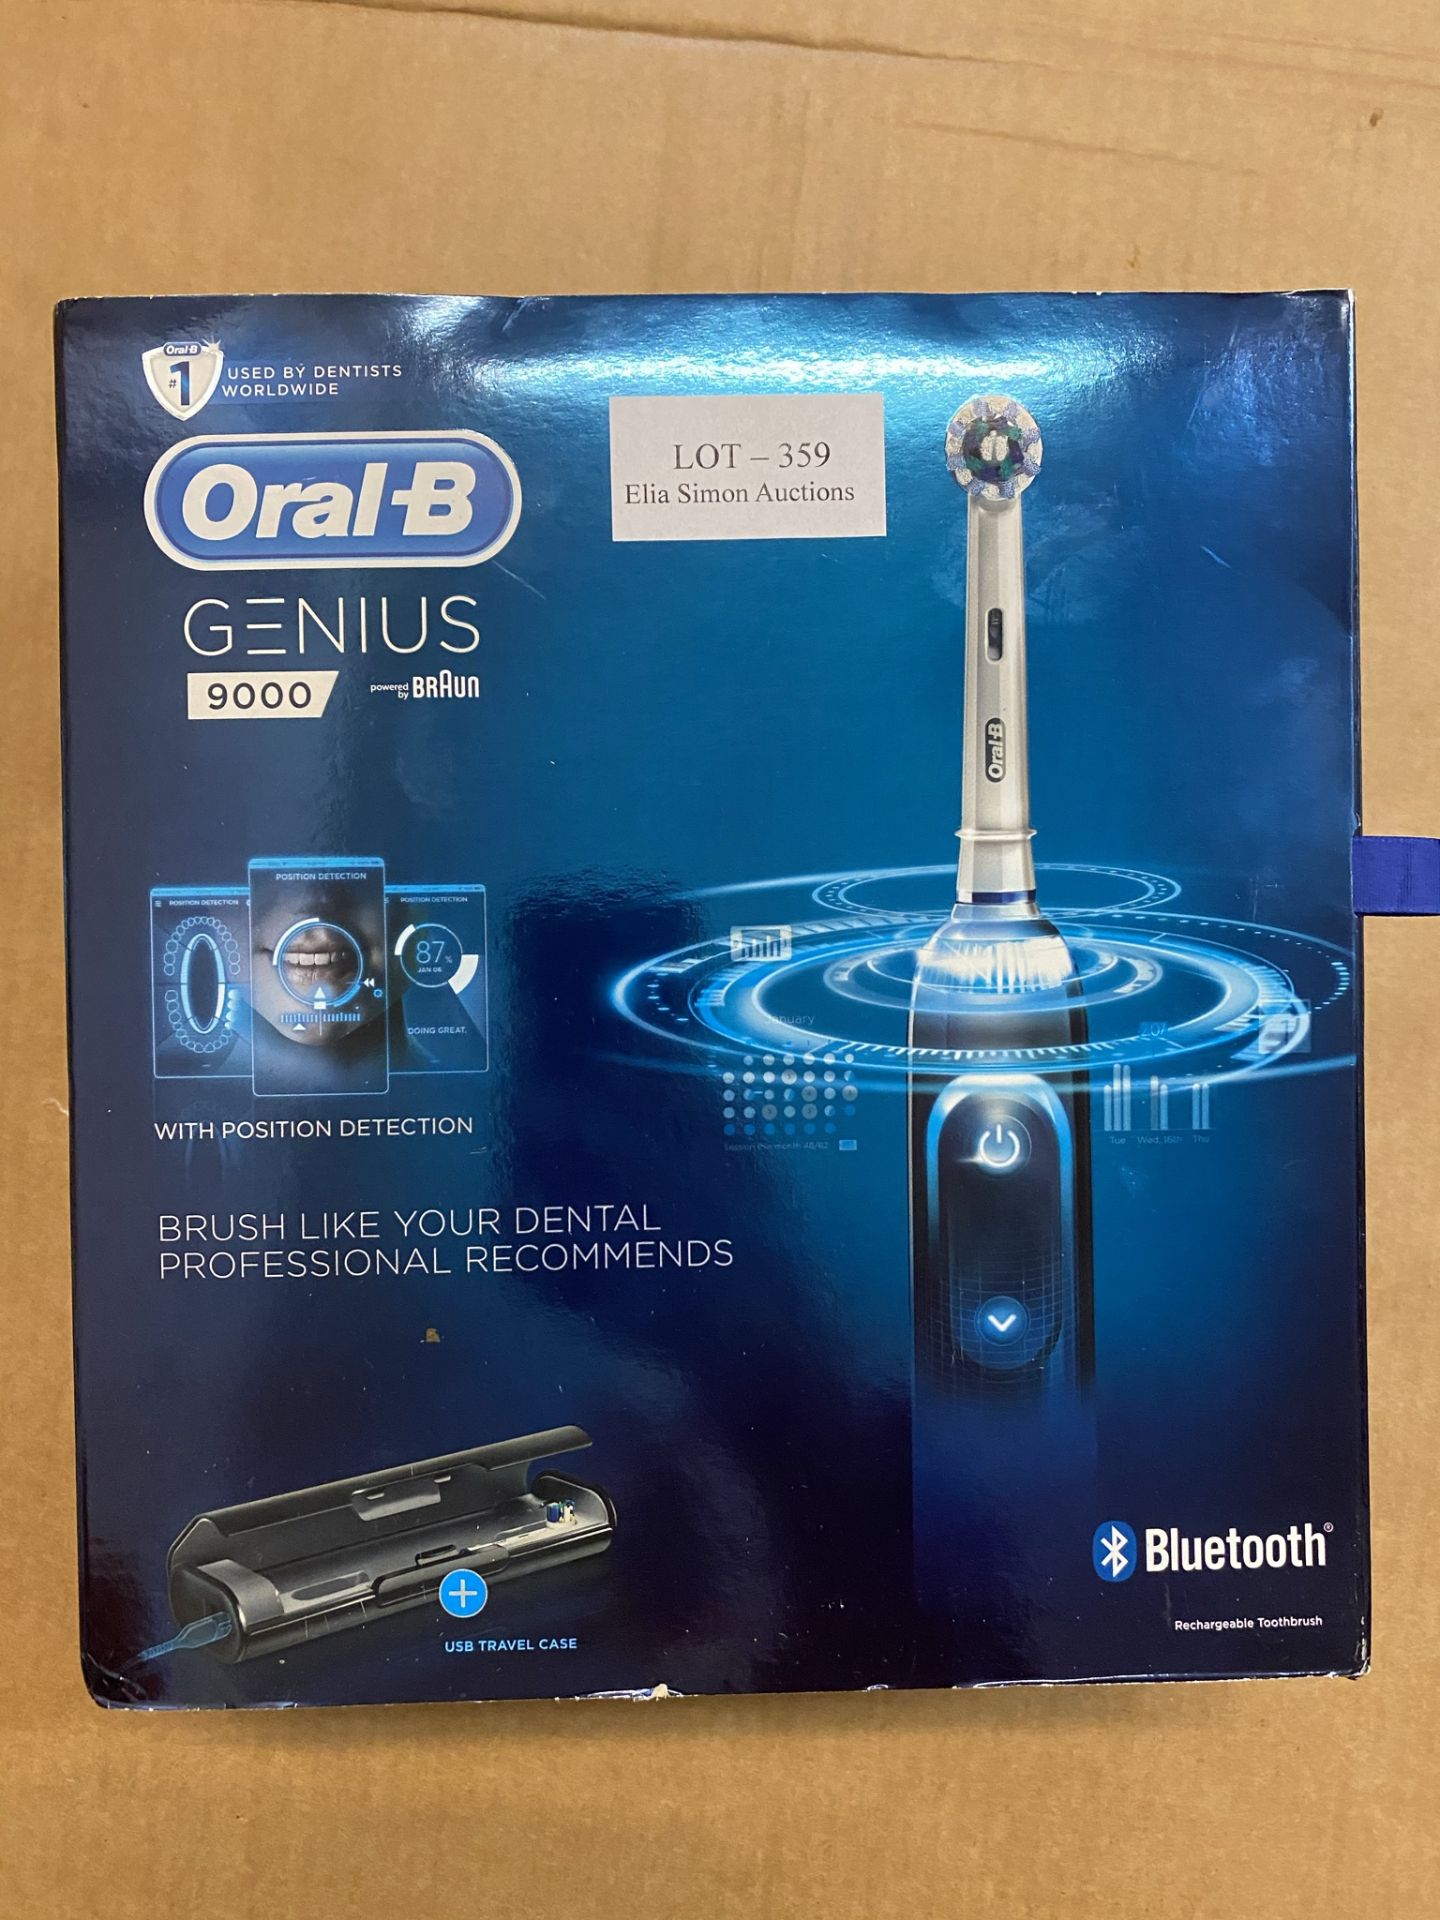 Oral-B Genius 9000 CrossAction Electric Toothbrush, 1 Black App Connected Handle, 6 Modes, Pressure - Image 2 of 2